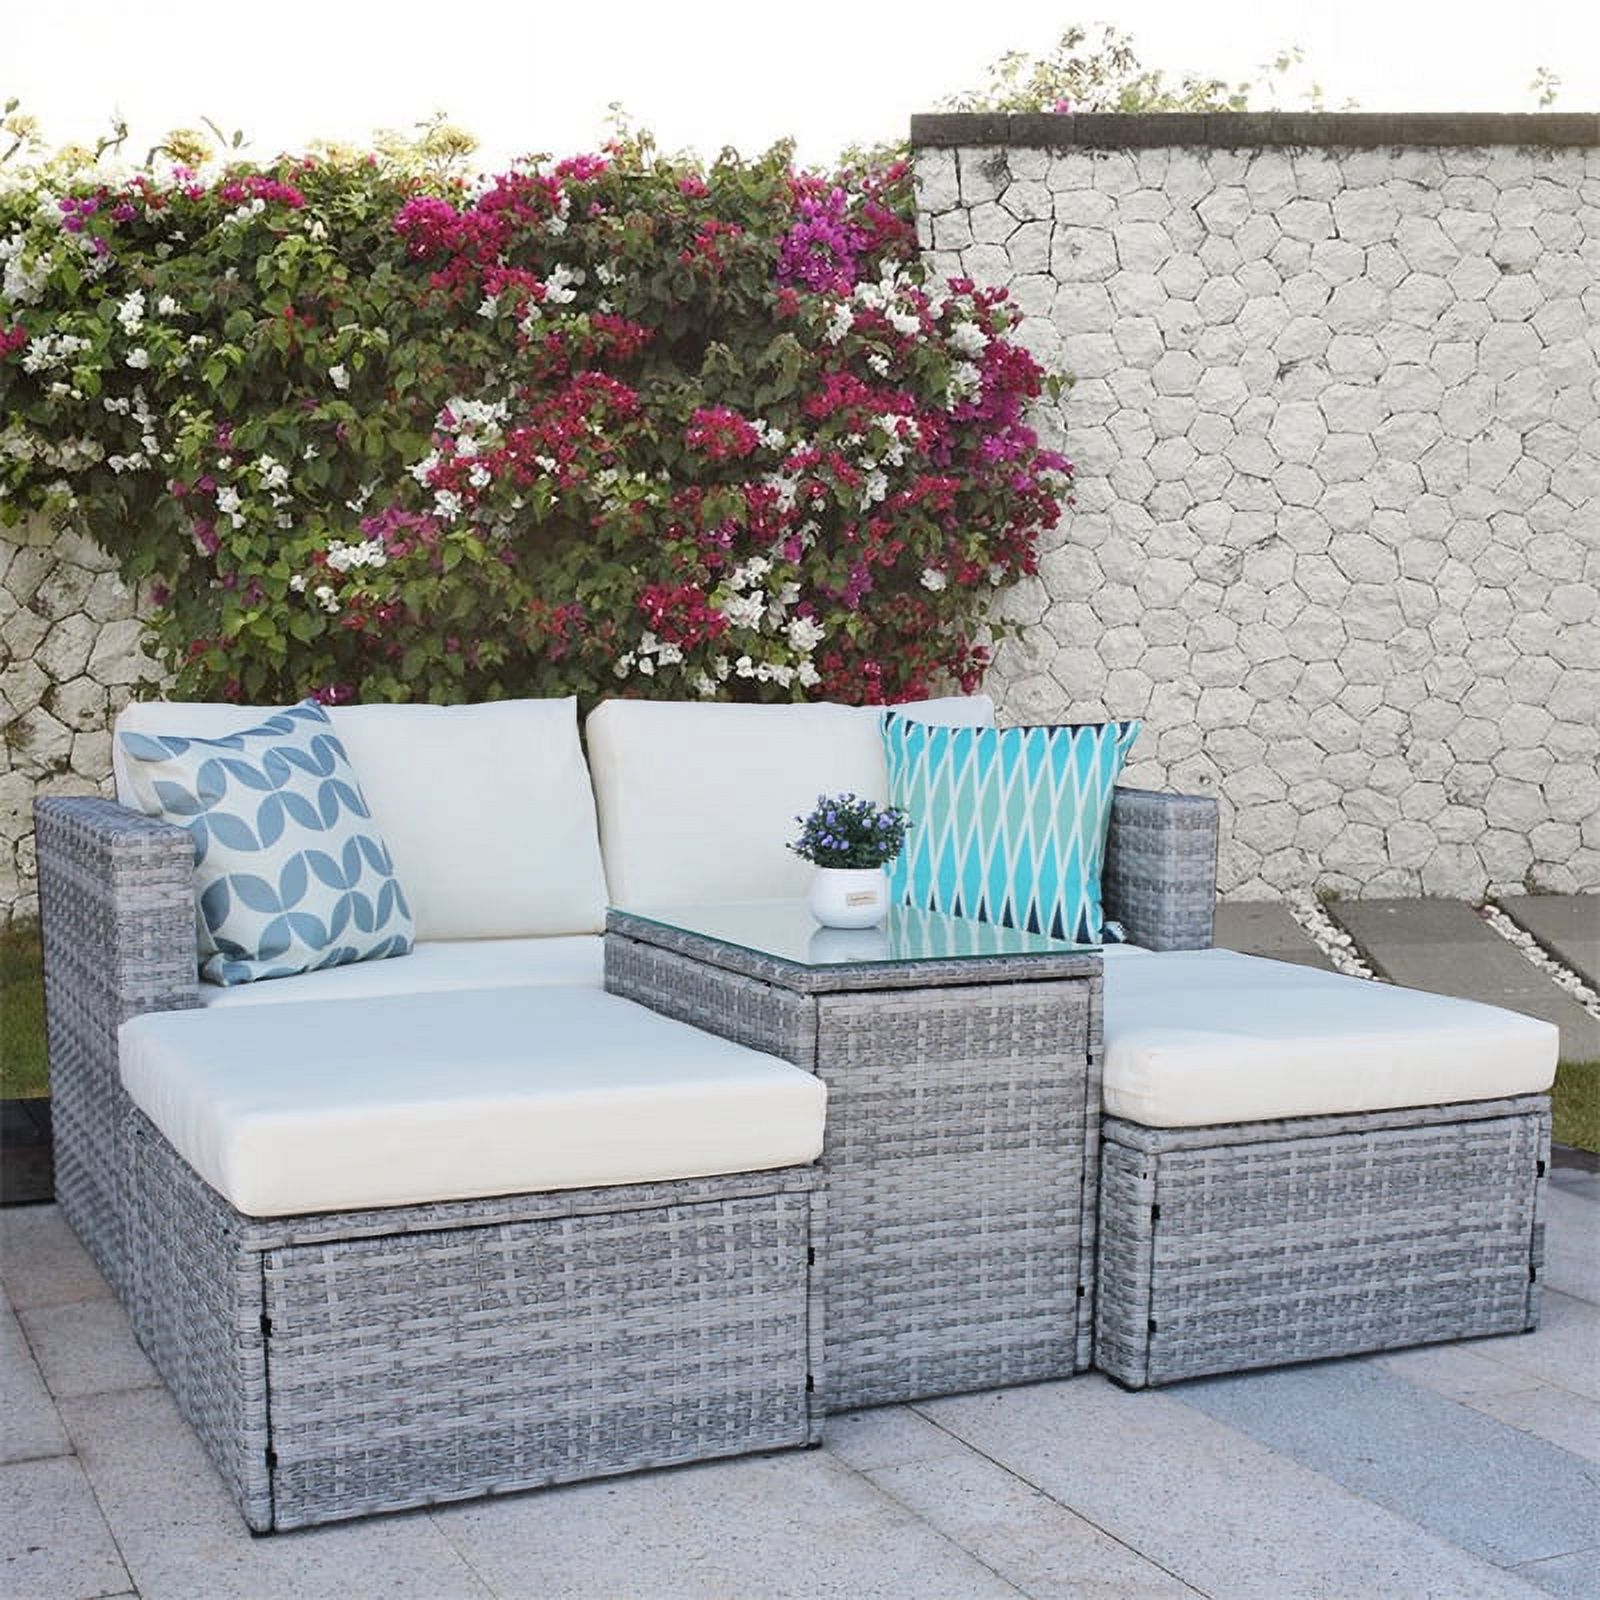 5 Pieces Outdoor Patio Sectional Sofa Set, Gray Rattan and Beige Cushion with Weather Protecting Cover, Patio Sofa Sets with 2 Rattan Chairs, 2 Pieces Patio Rattan Ottomans and Coffee Table - image 3 of 7